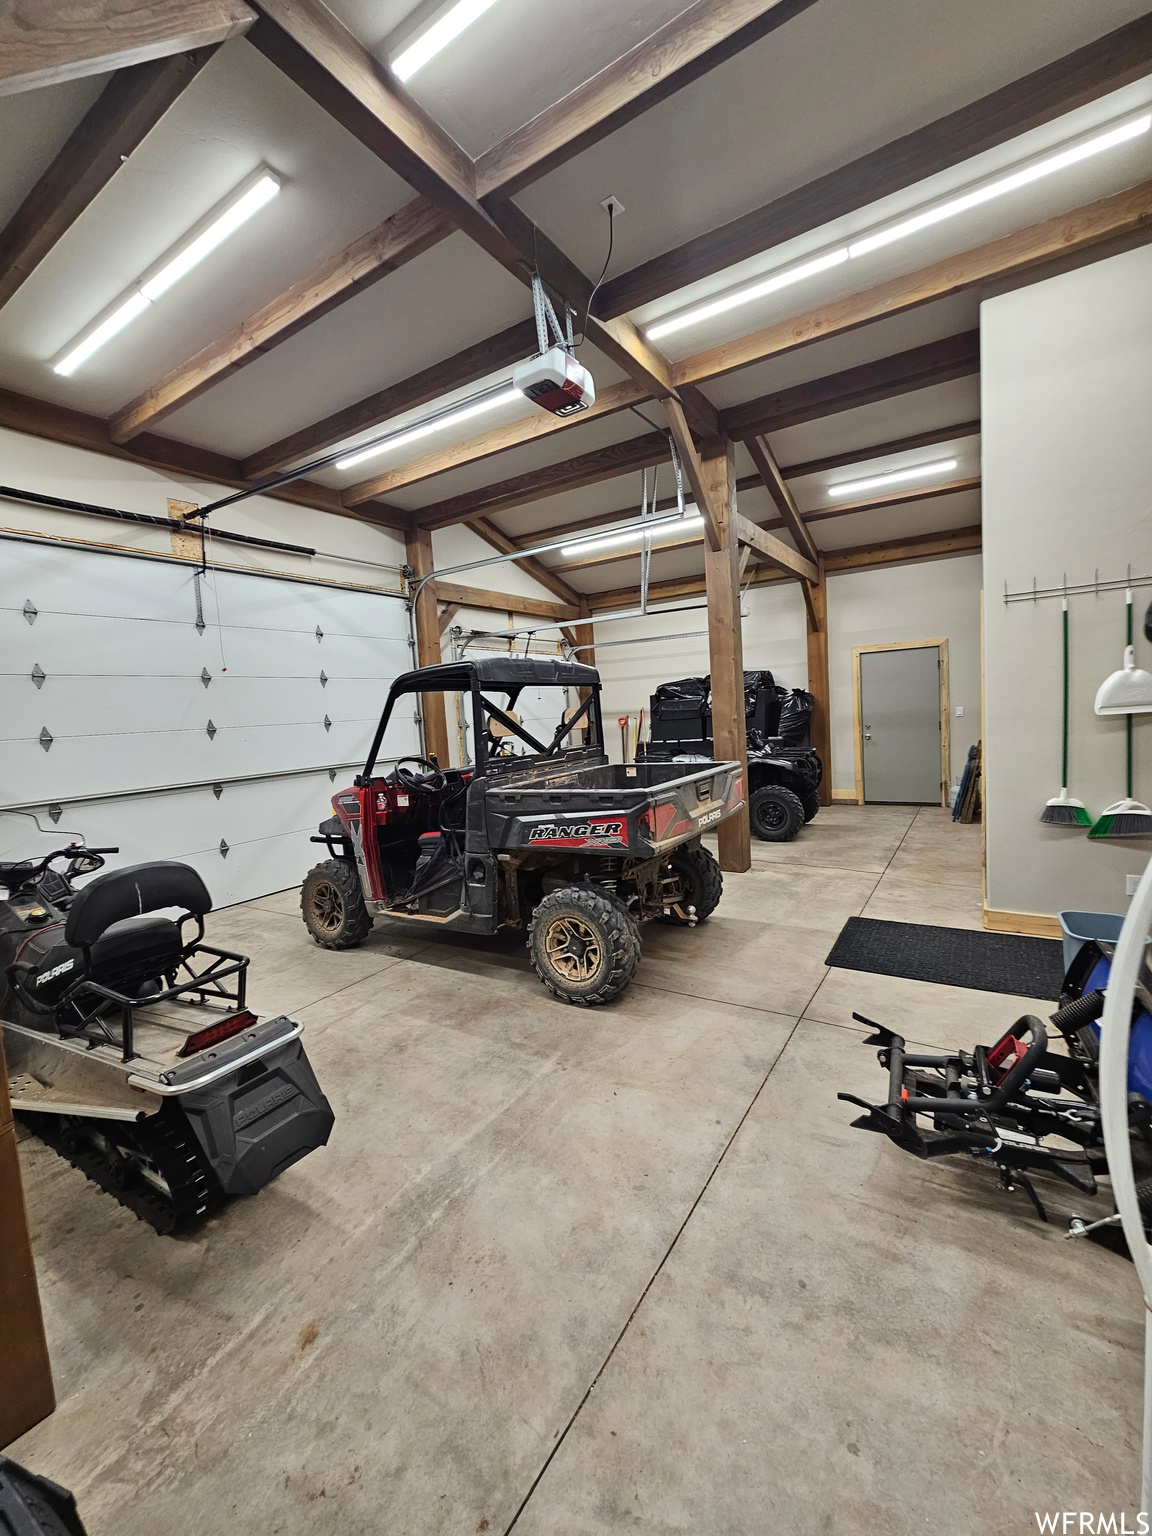 HUGE Garage for all the toys!